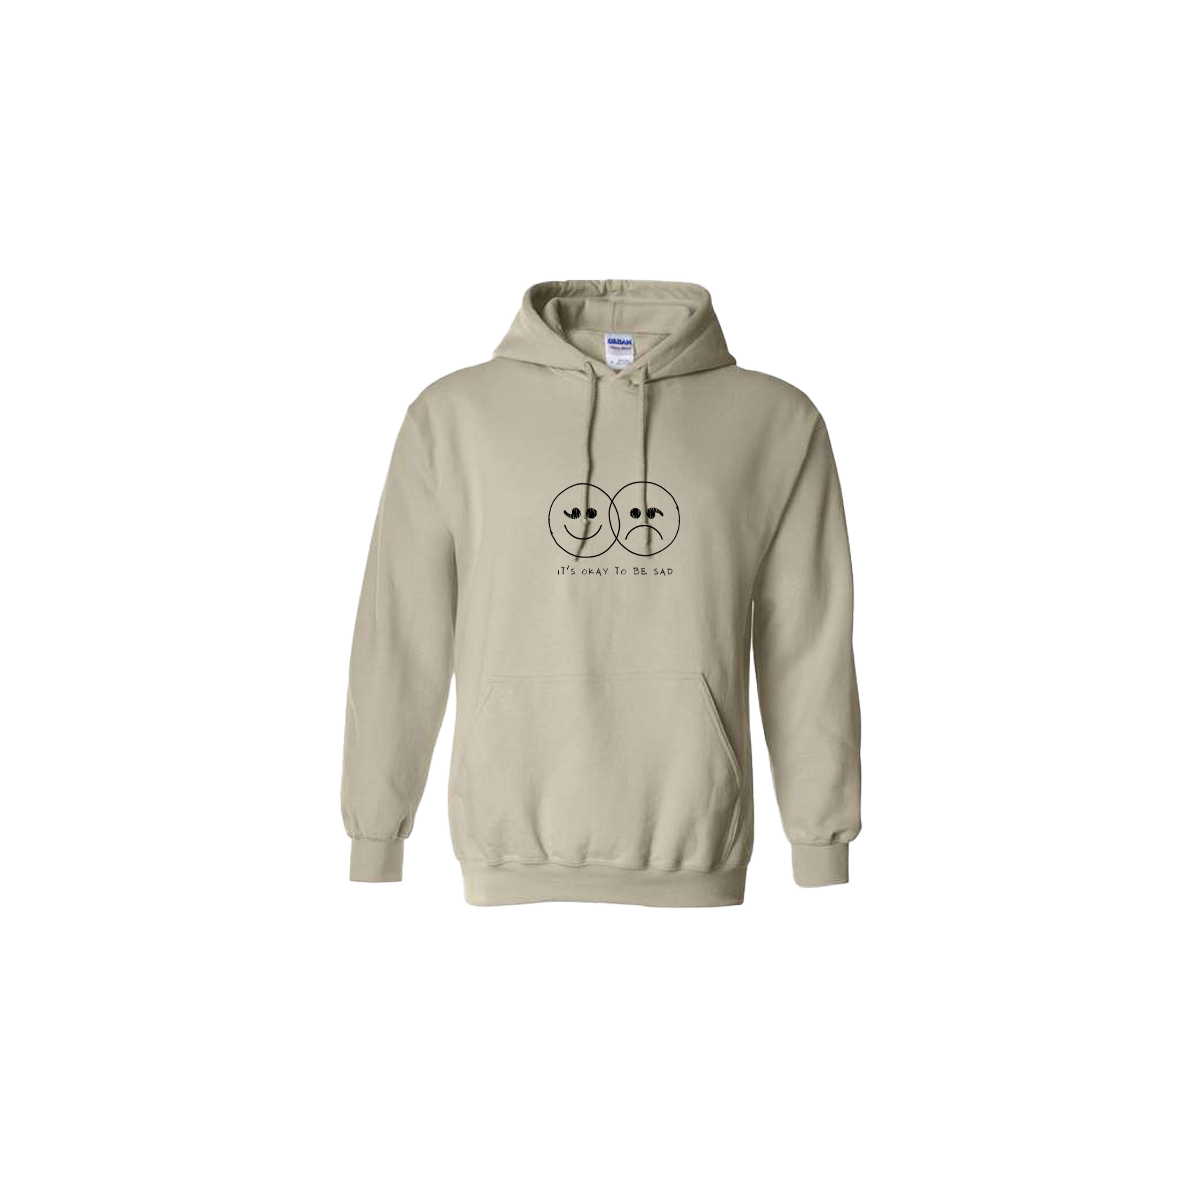 It's Okay to be Sad Double Smiley Face Embroidered Beige Hoodie - Mental Health Awareness Clothing